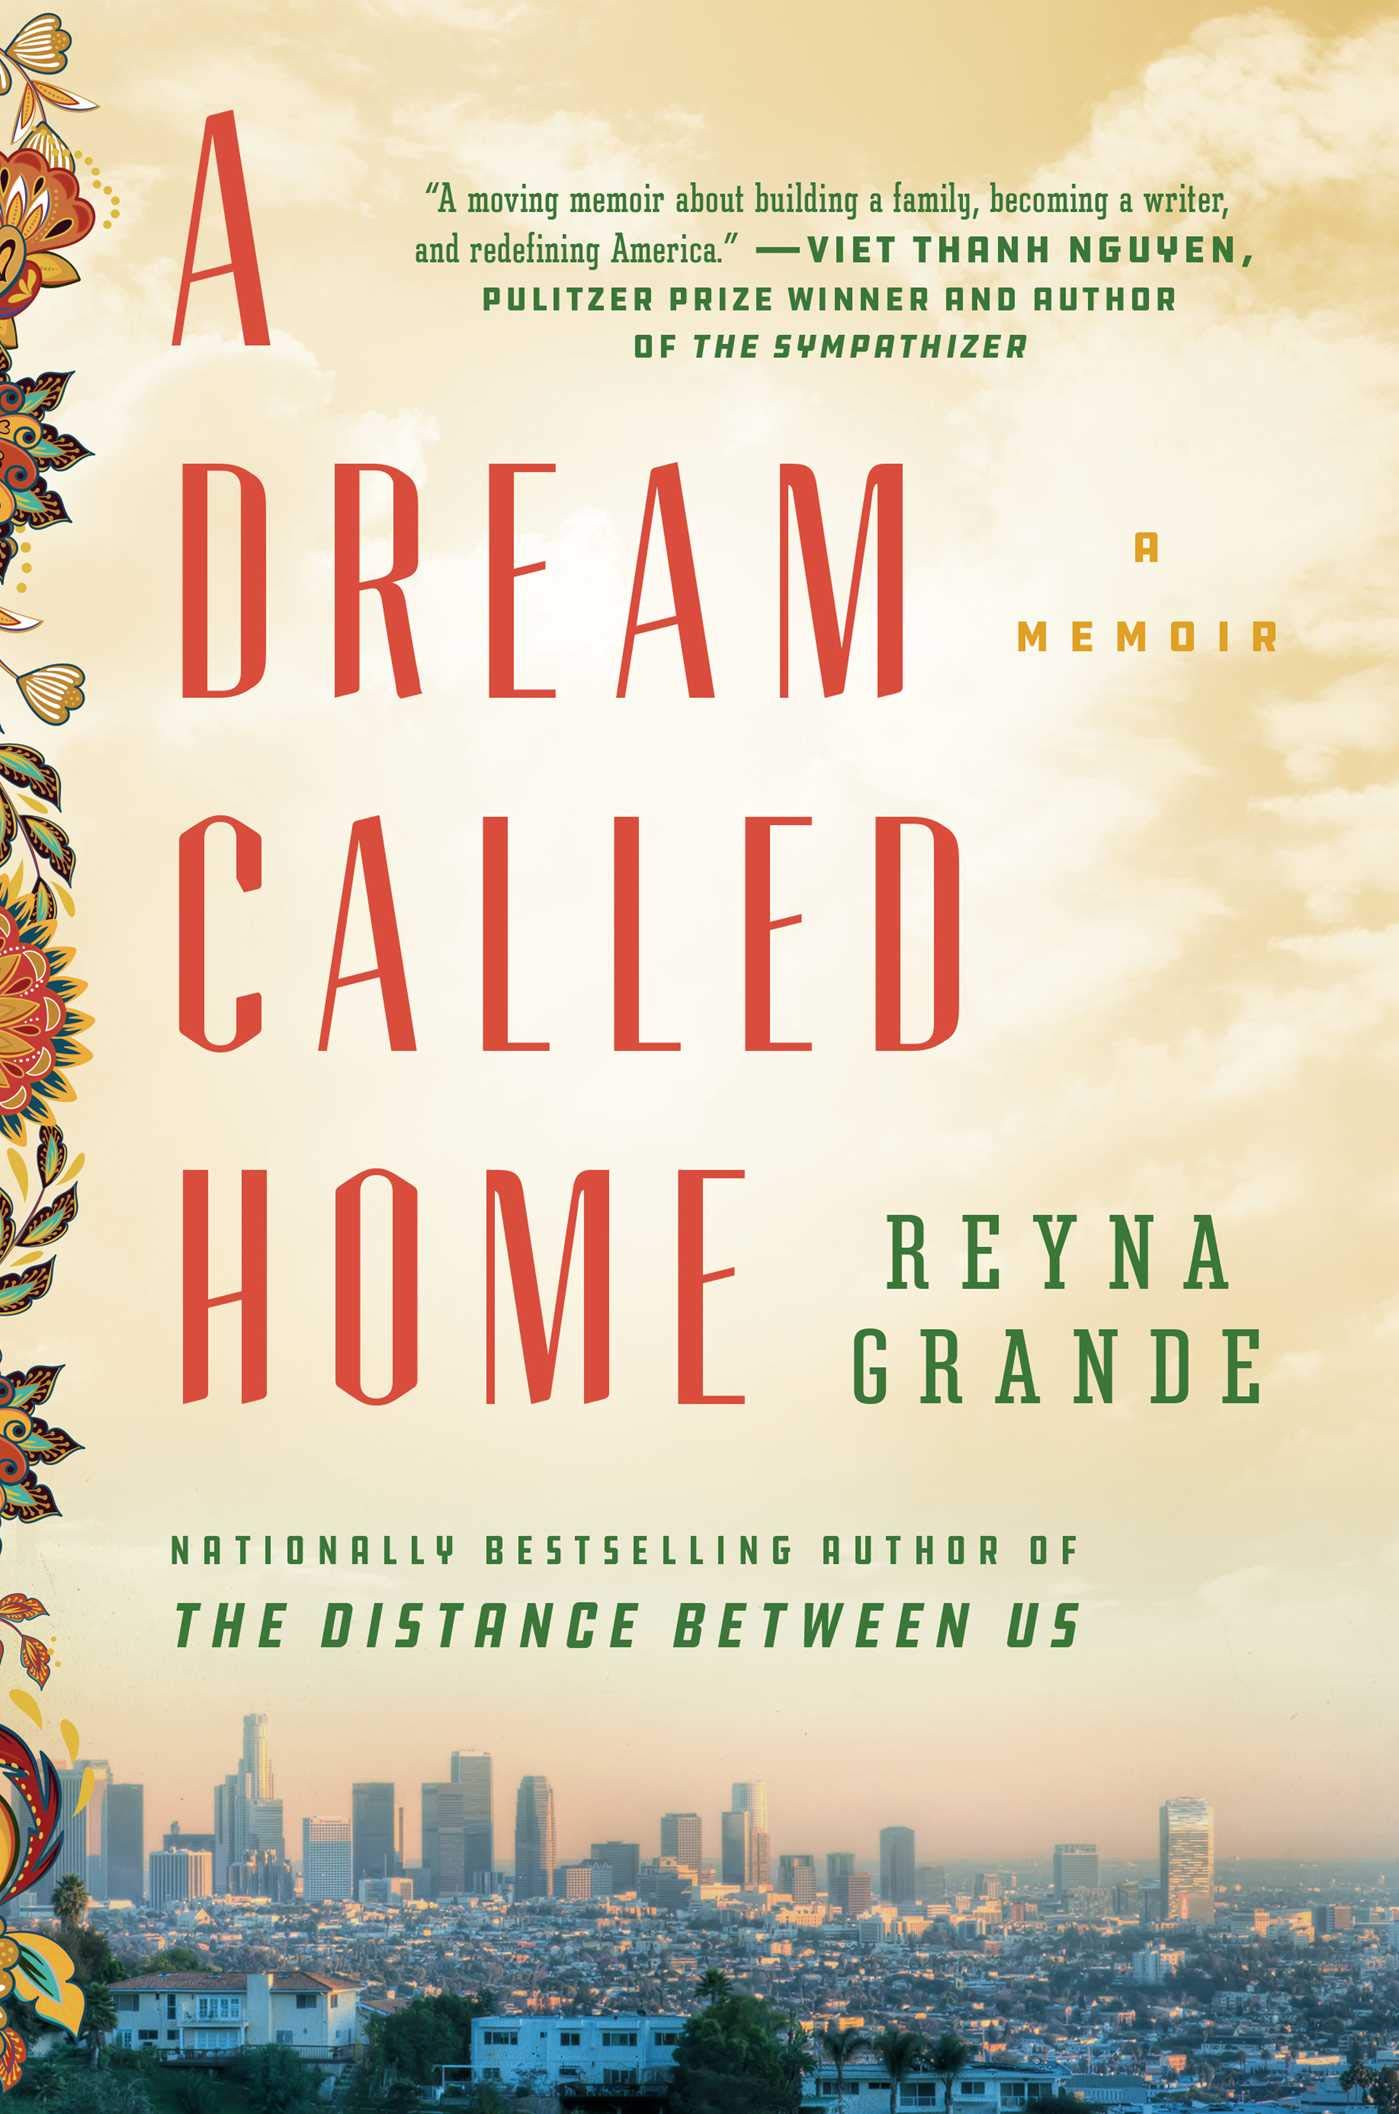 Book front cover "A Dream Called Home"